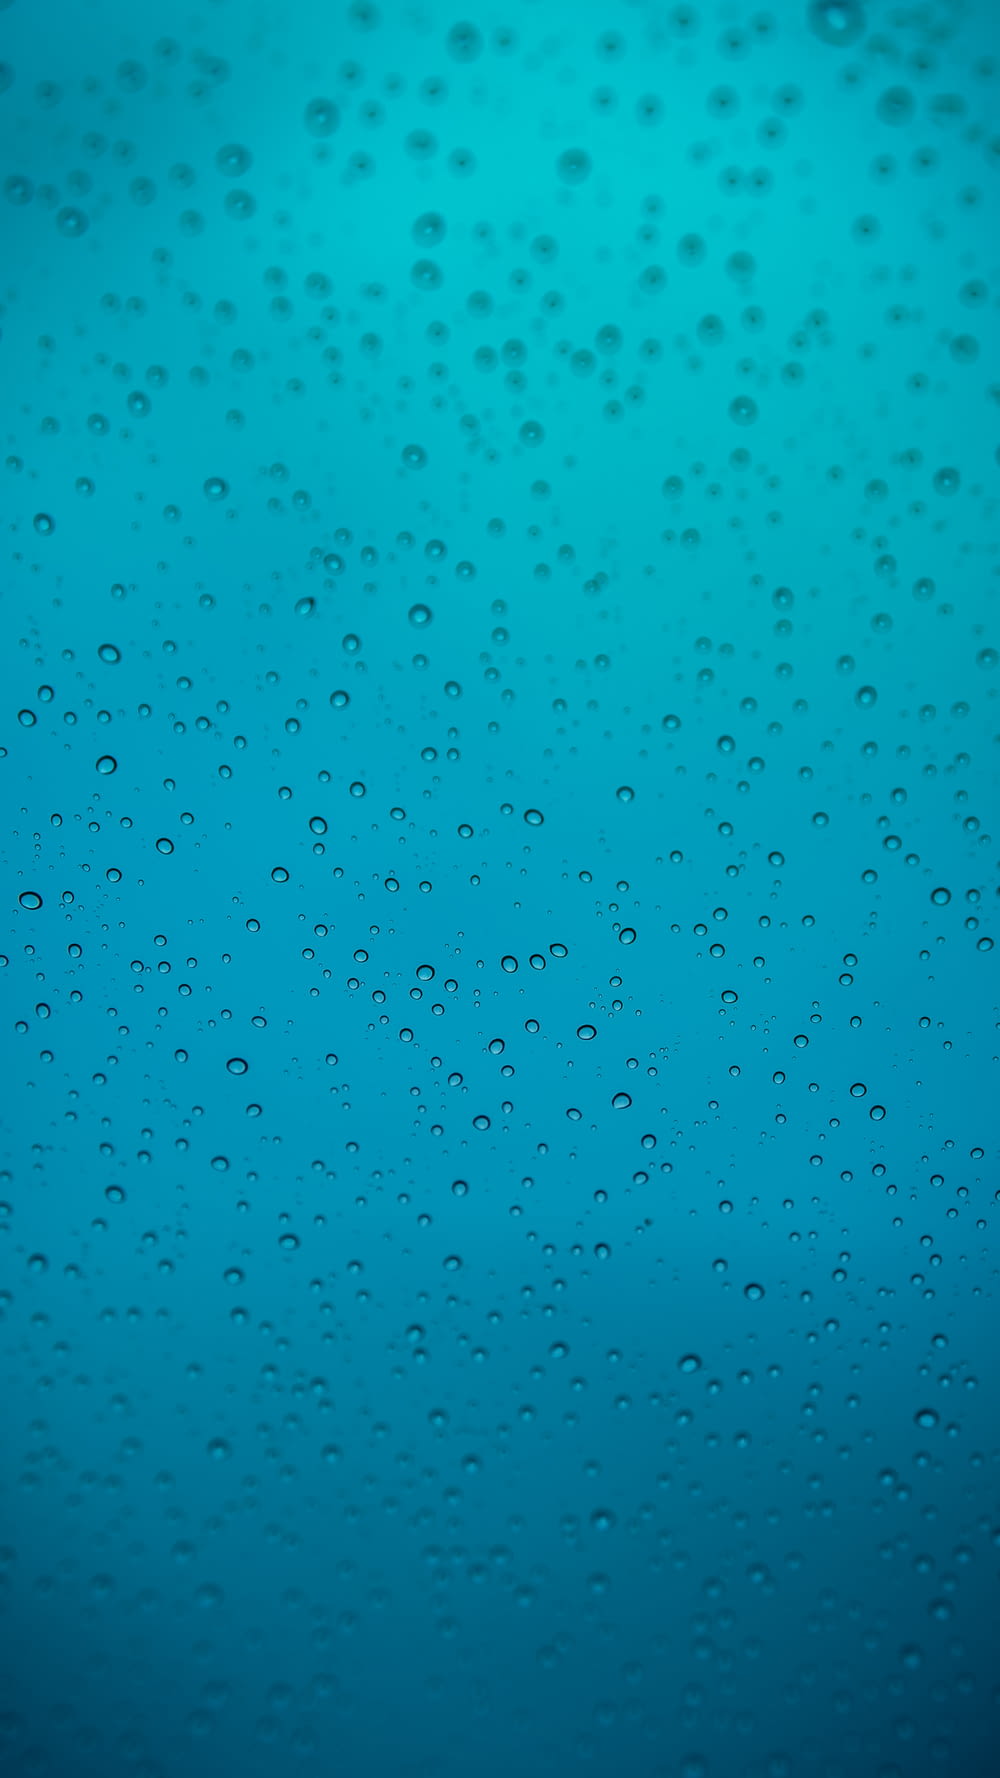 water droplets on teal surface